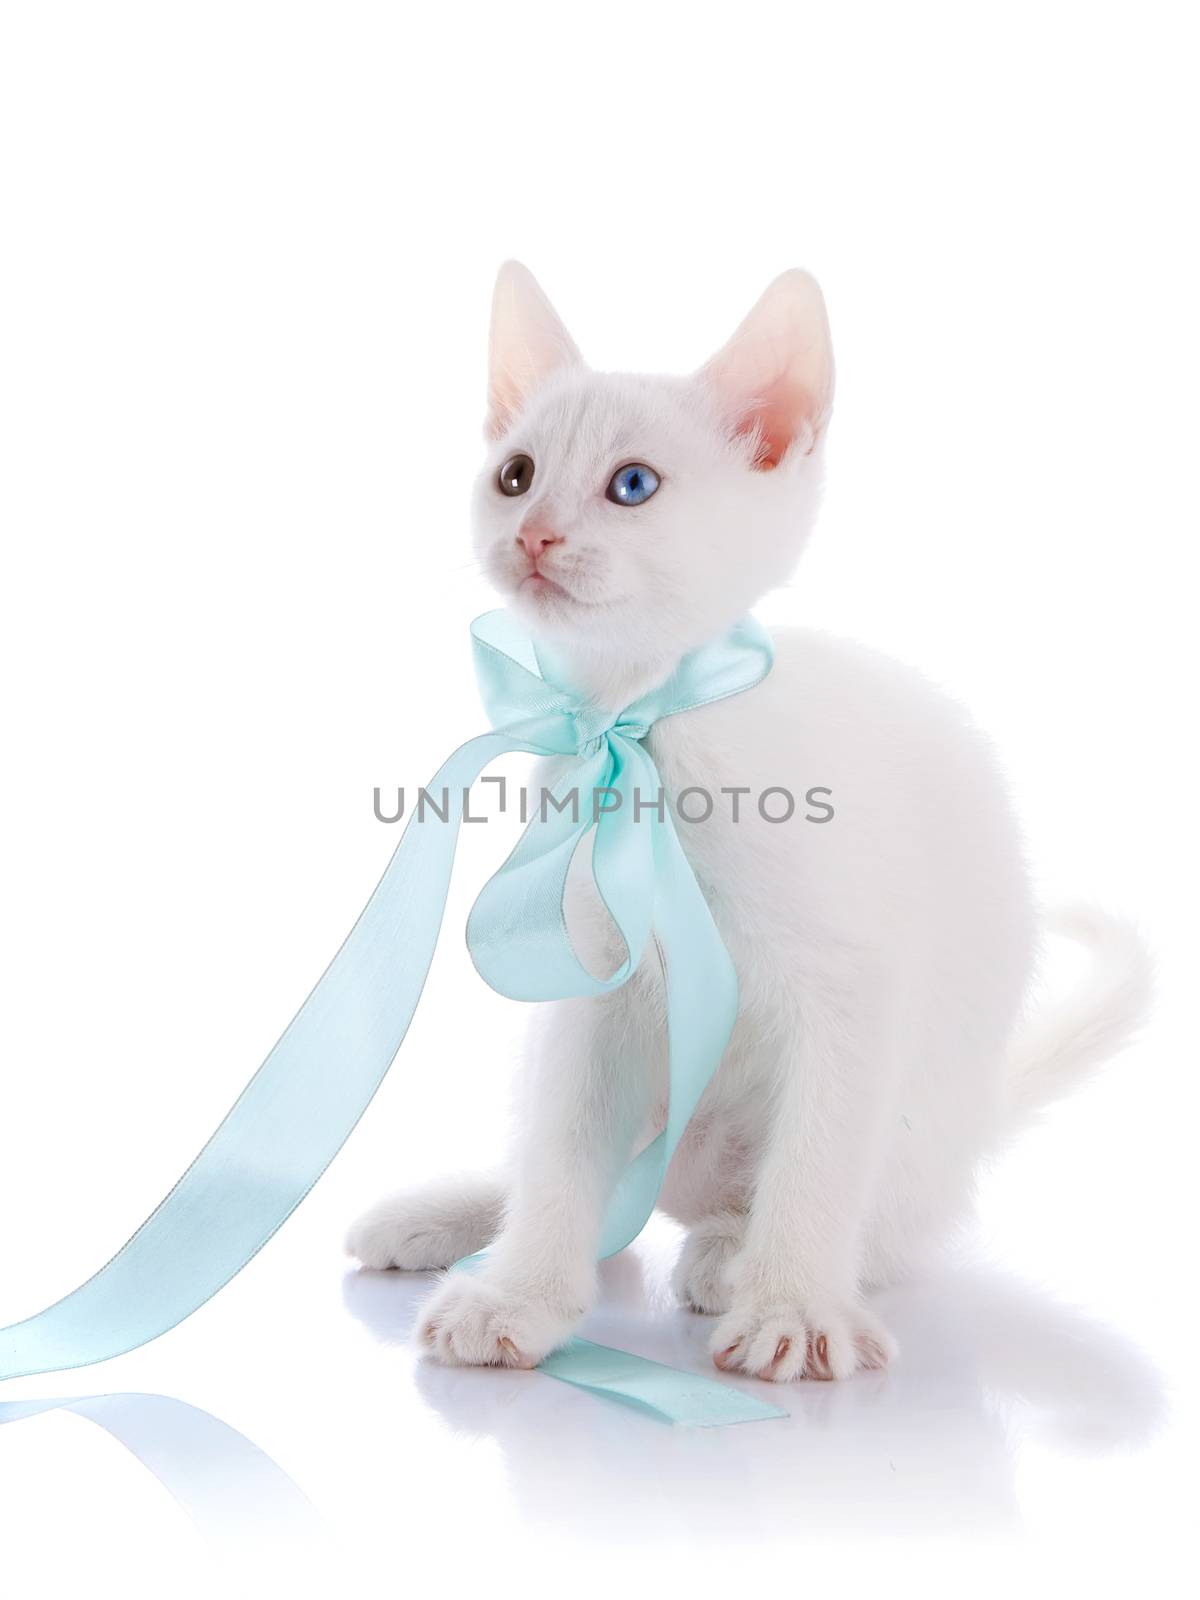 Kitten with a blue bow. White kitten with multi-colored eyes. Kitten on a white background. Small predator. Small cat.